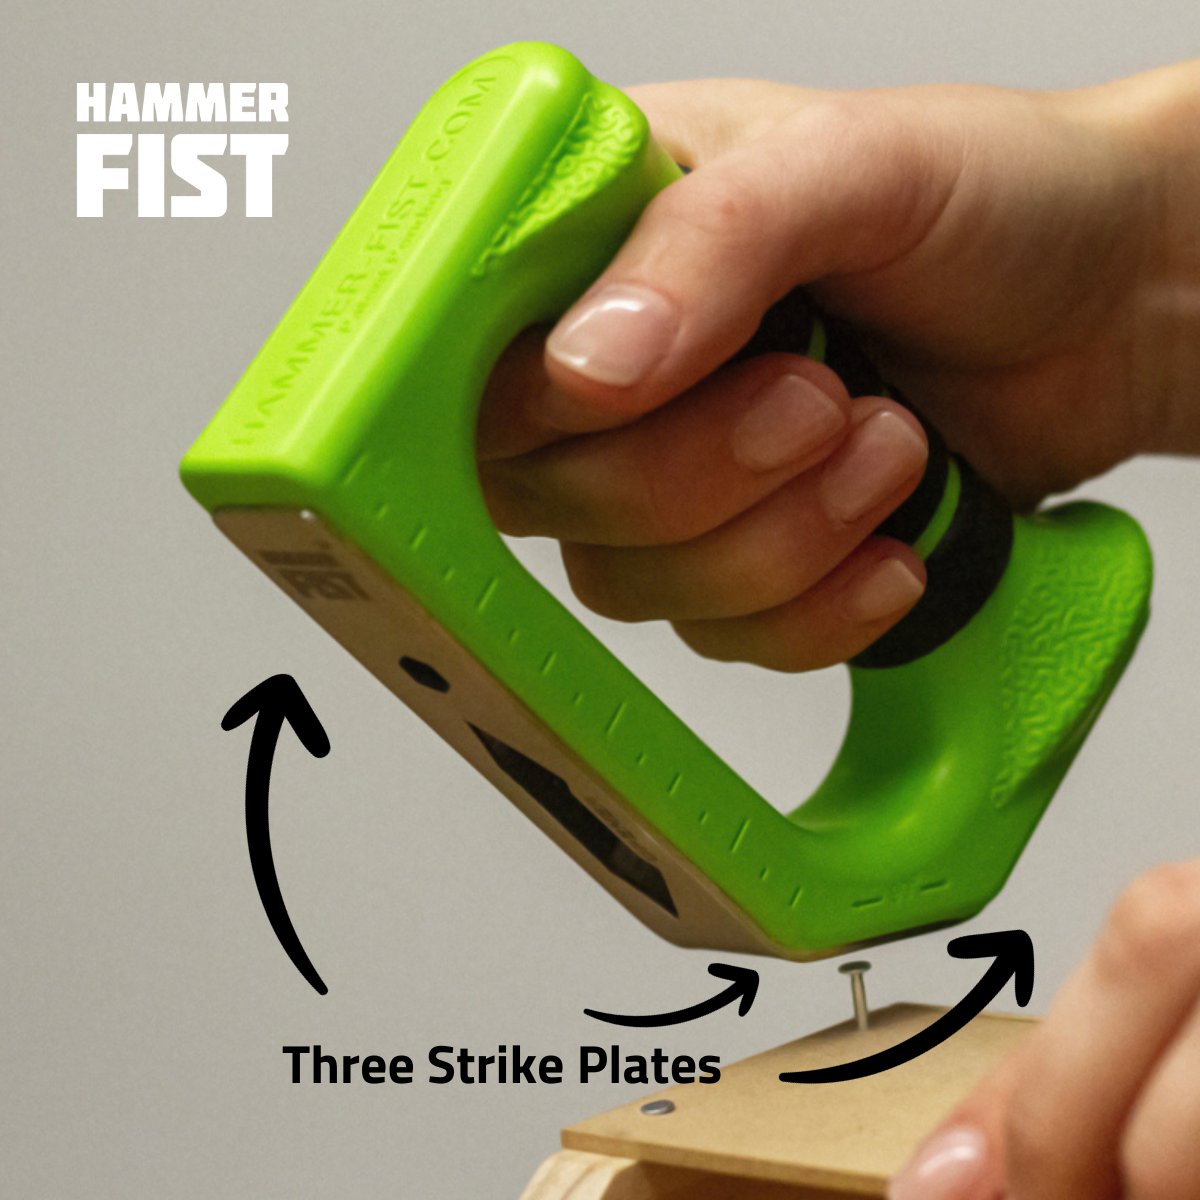 Never miss your mark with Hammer Fist's 3 Strike Plates! Perfectly align nails, screws or any fasteners with ease and precision.

#HammerFist #DIY #DIYTools